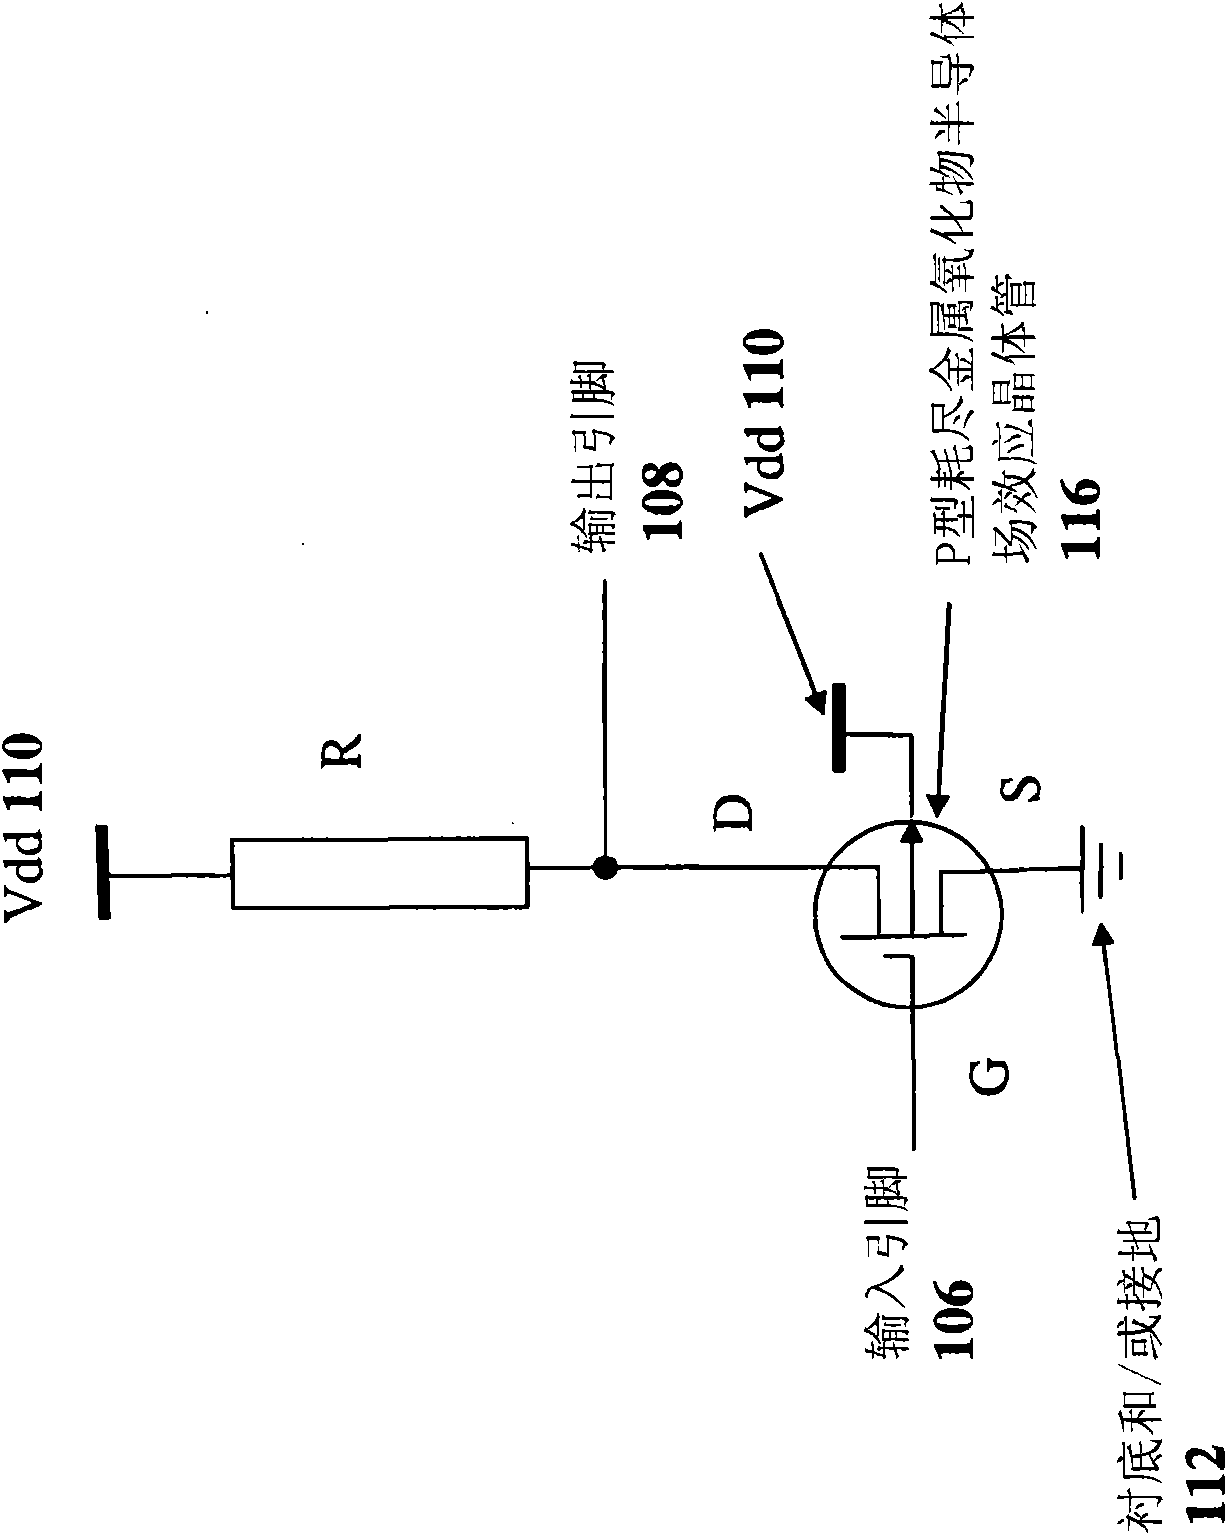 Depletion-mode MOSFET circuit and applications